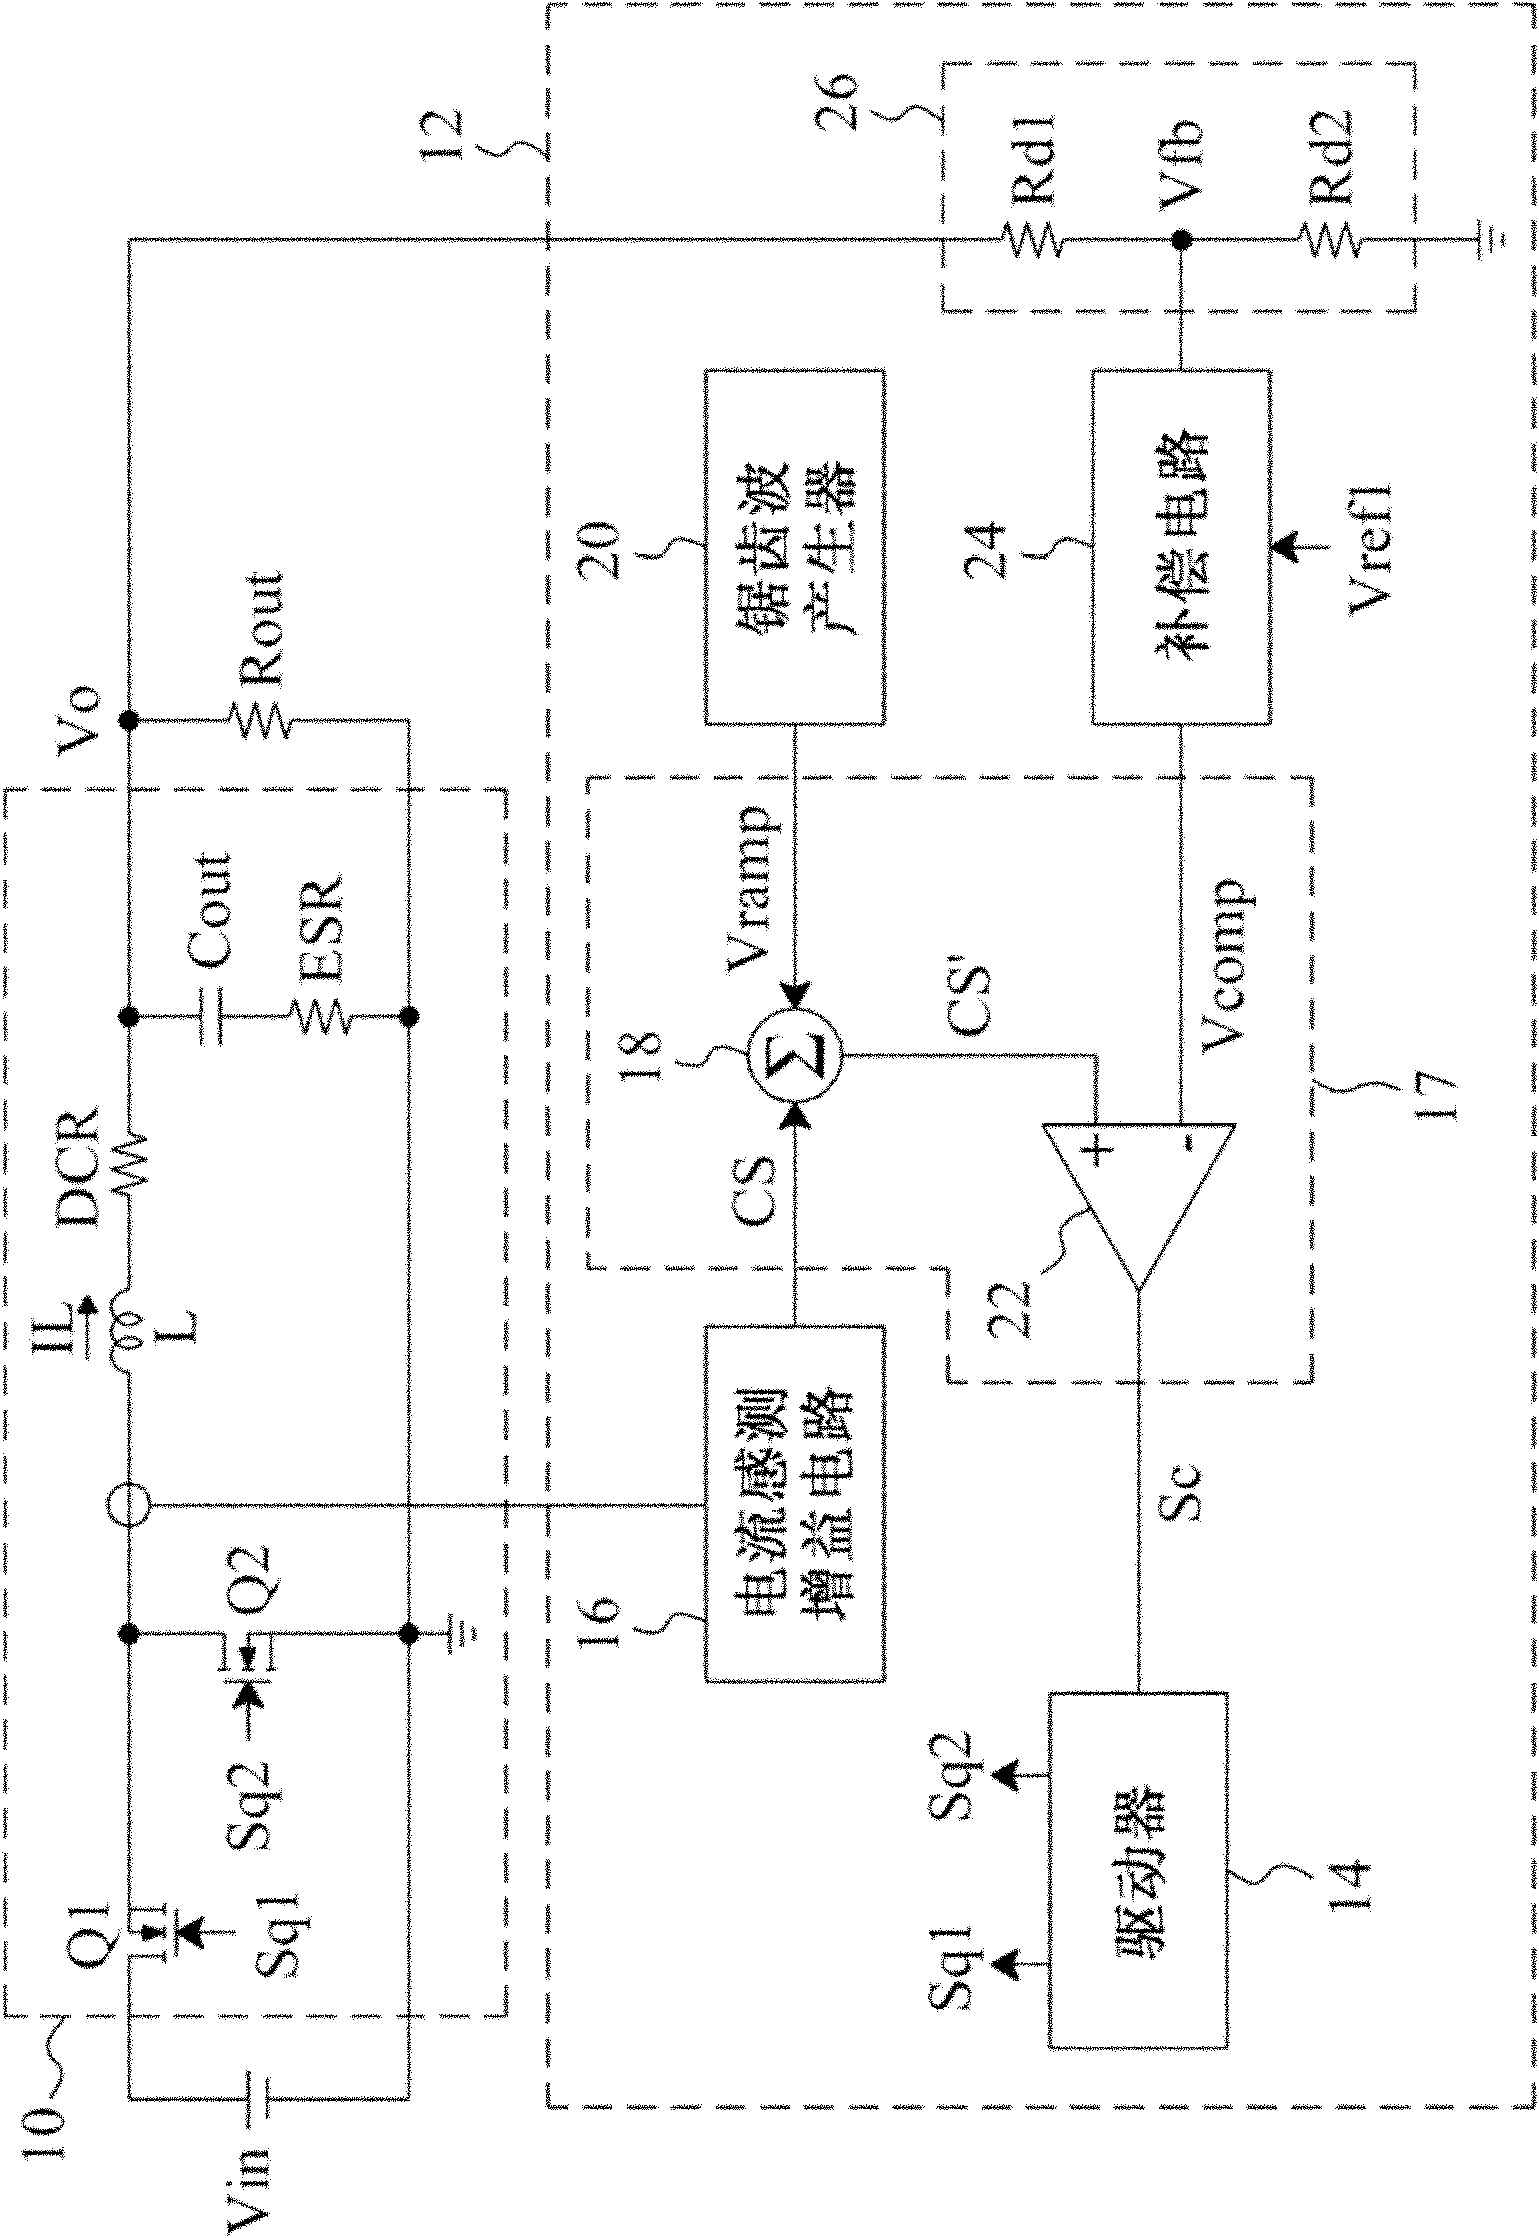 Circuit and method for controlling power converter in current mode